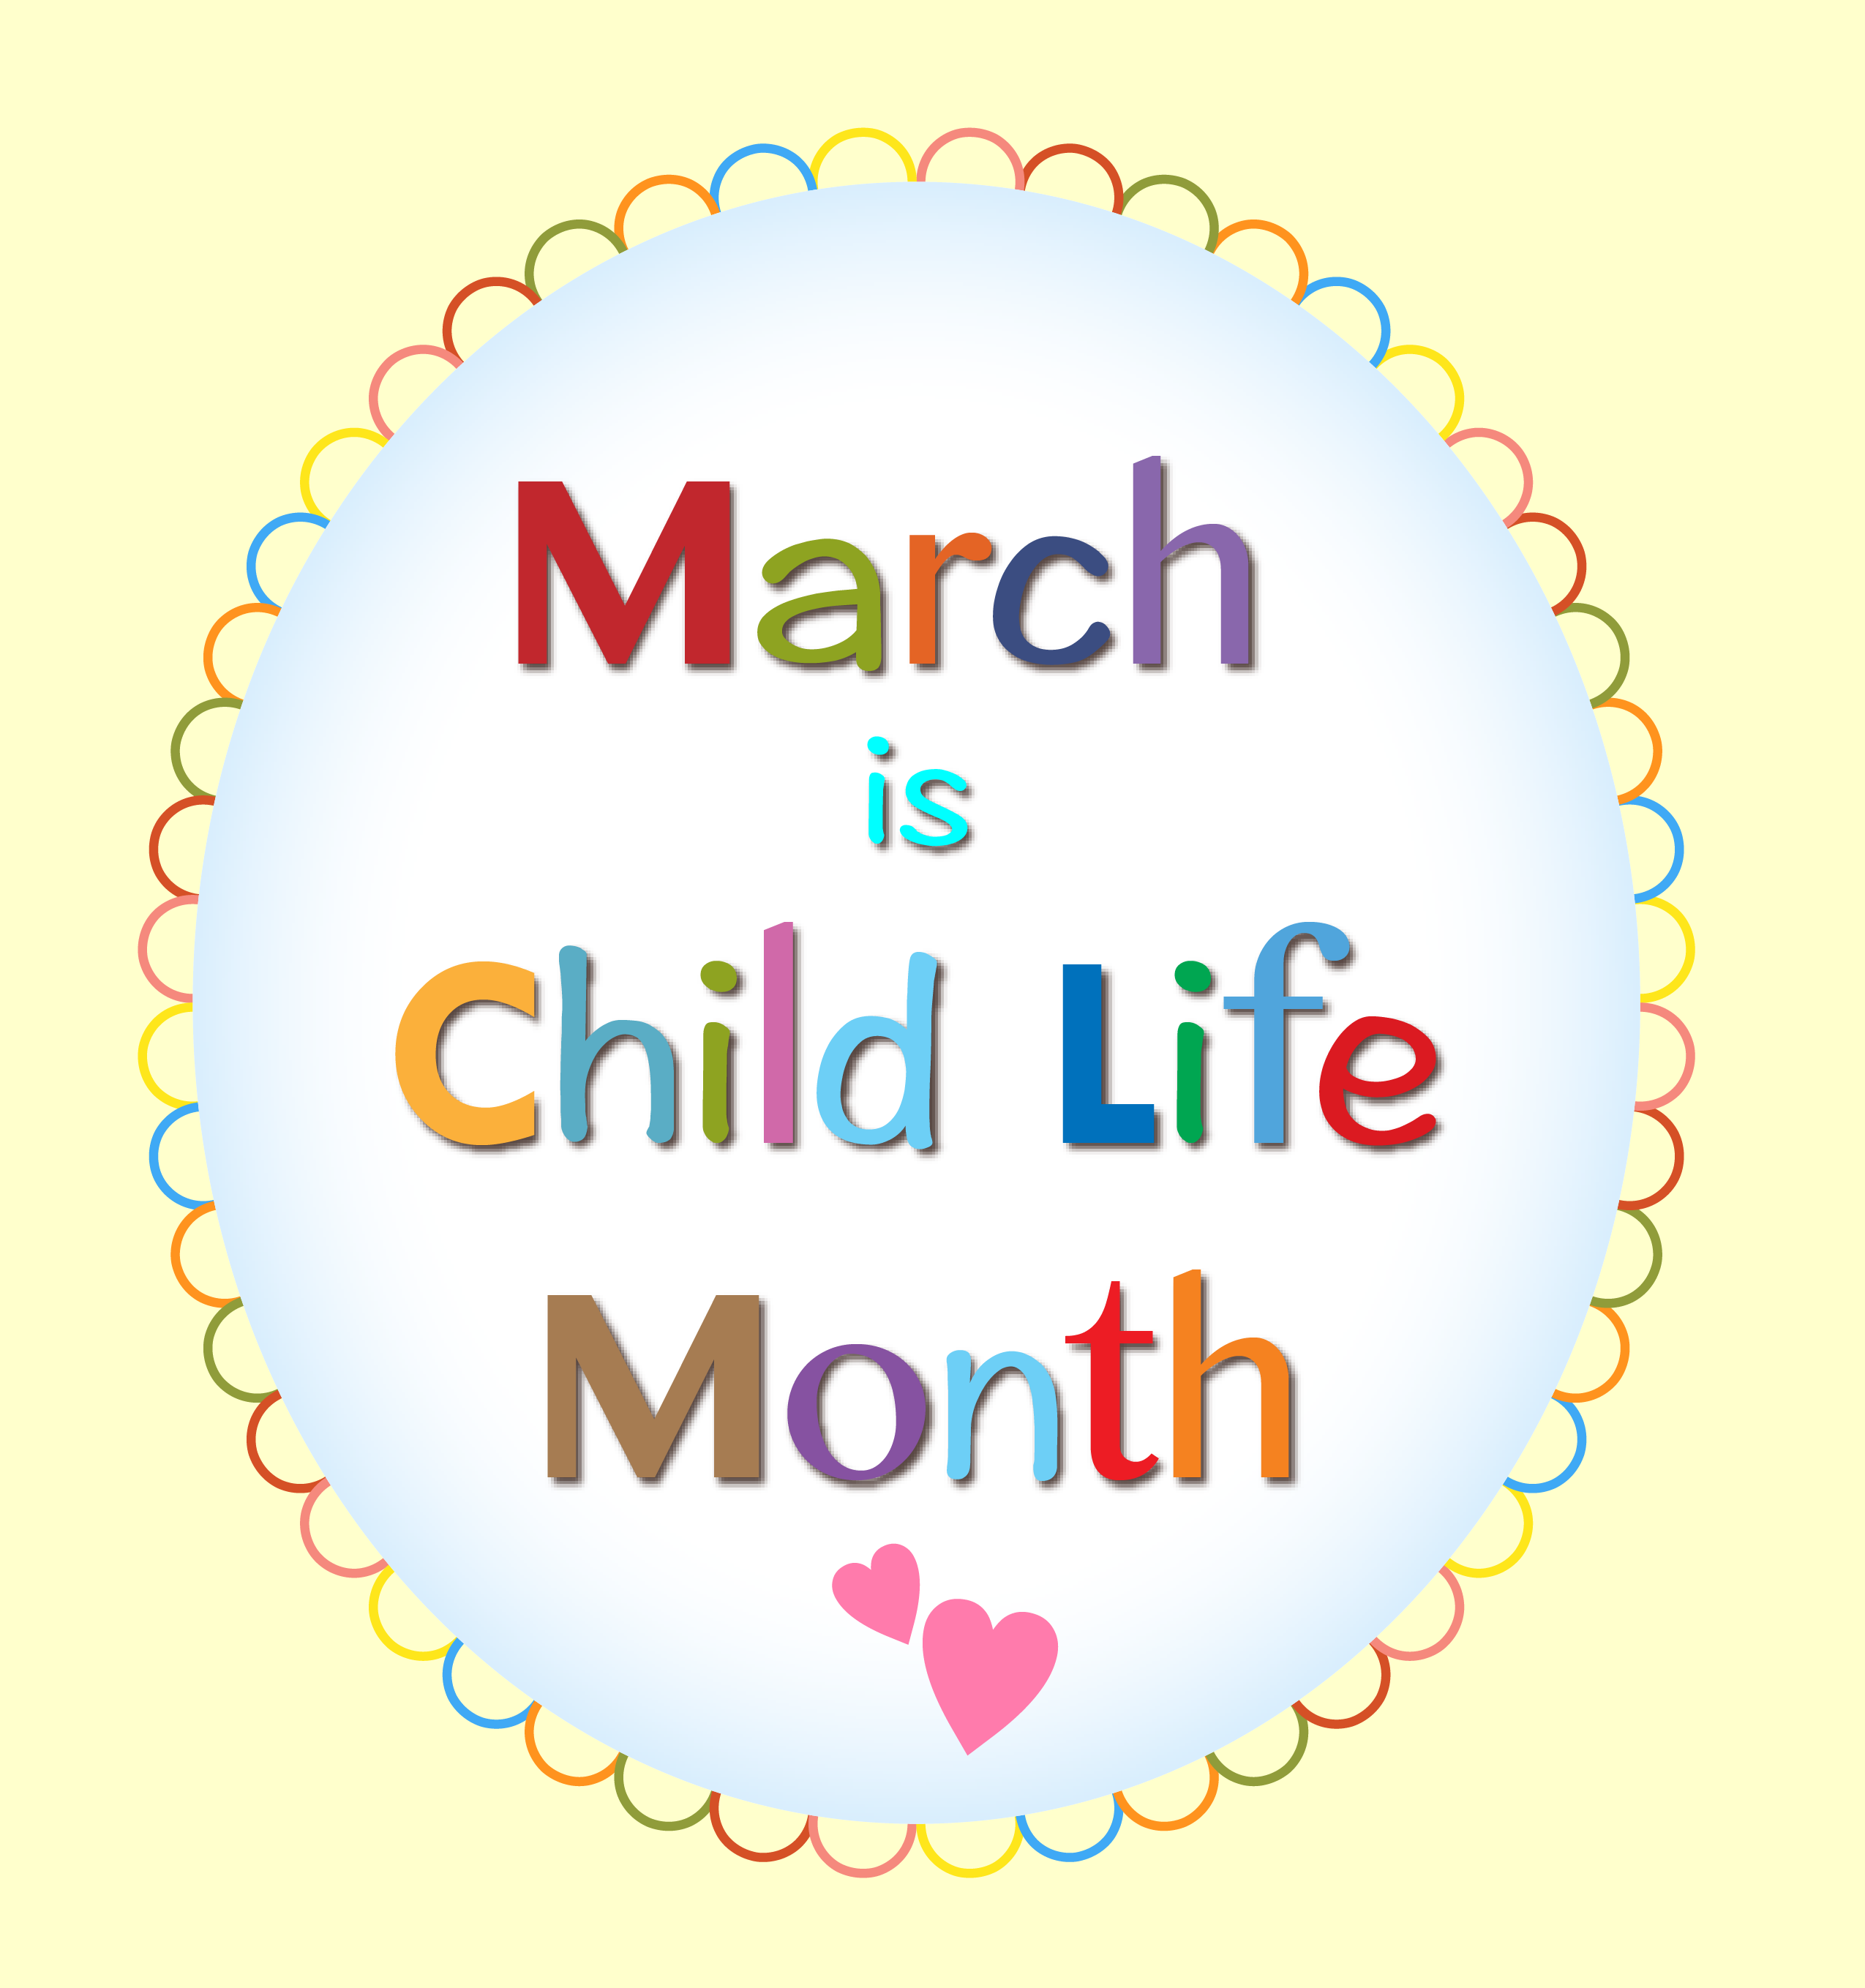 March is Child Life Month